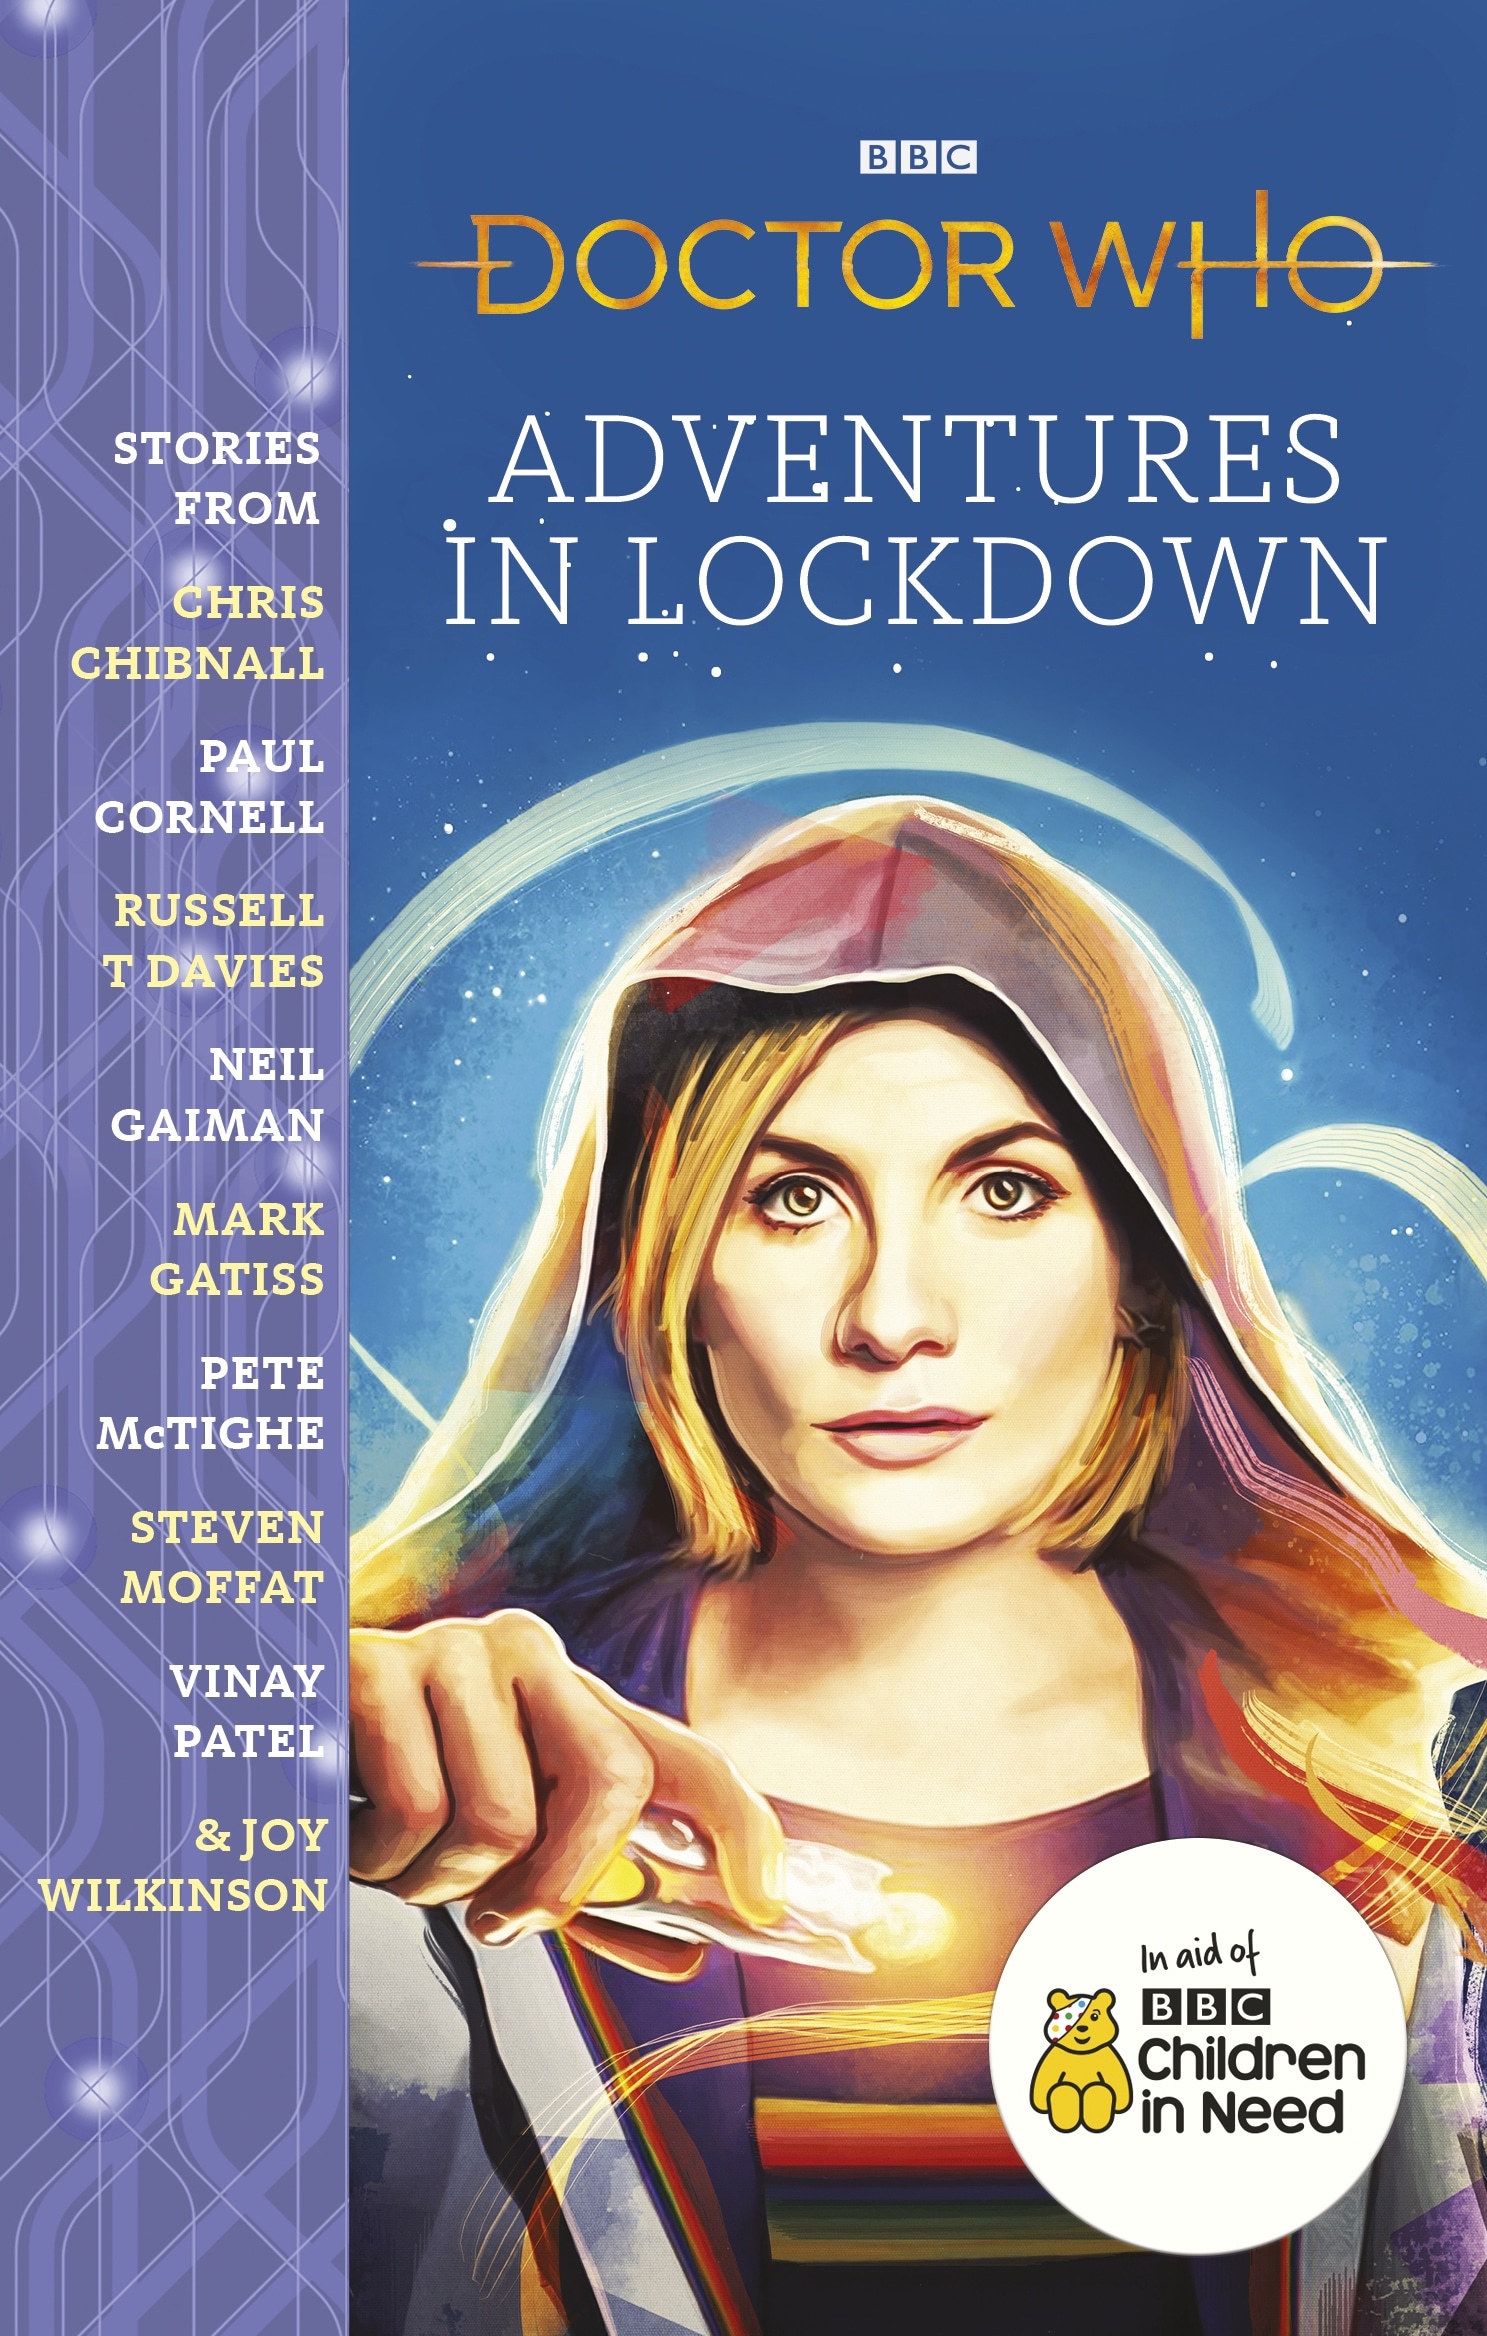 Book “Doctor Who: Adventures in Lockdown” by Chris Chibnall — November 5, 2020